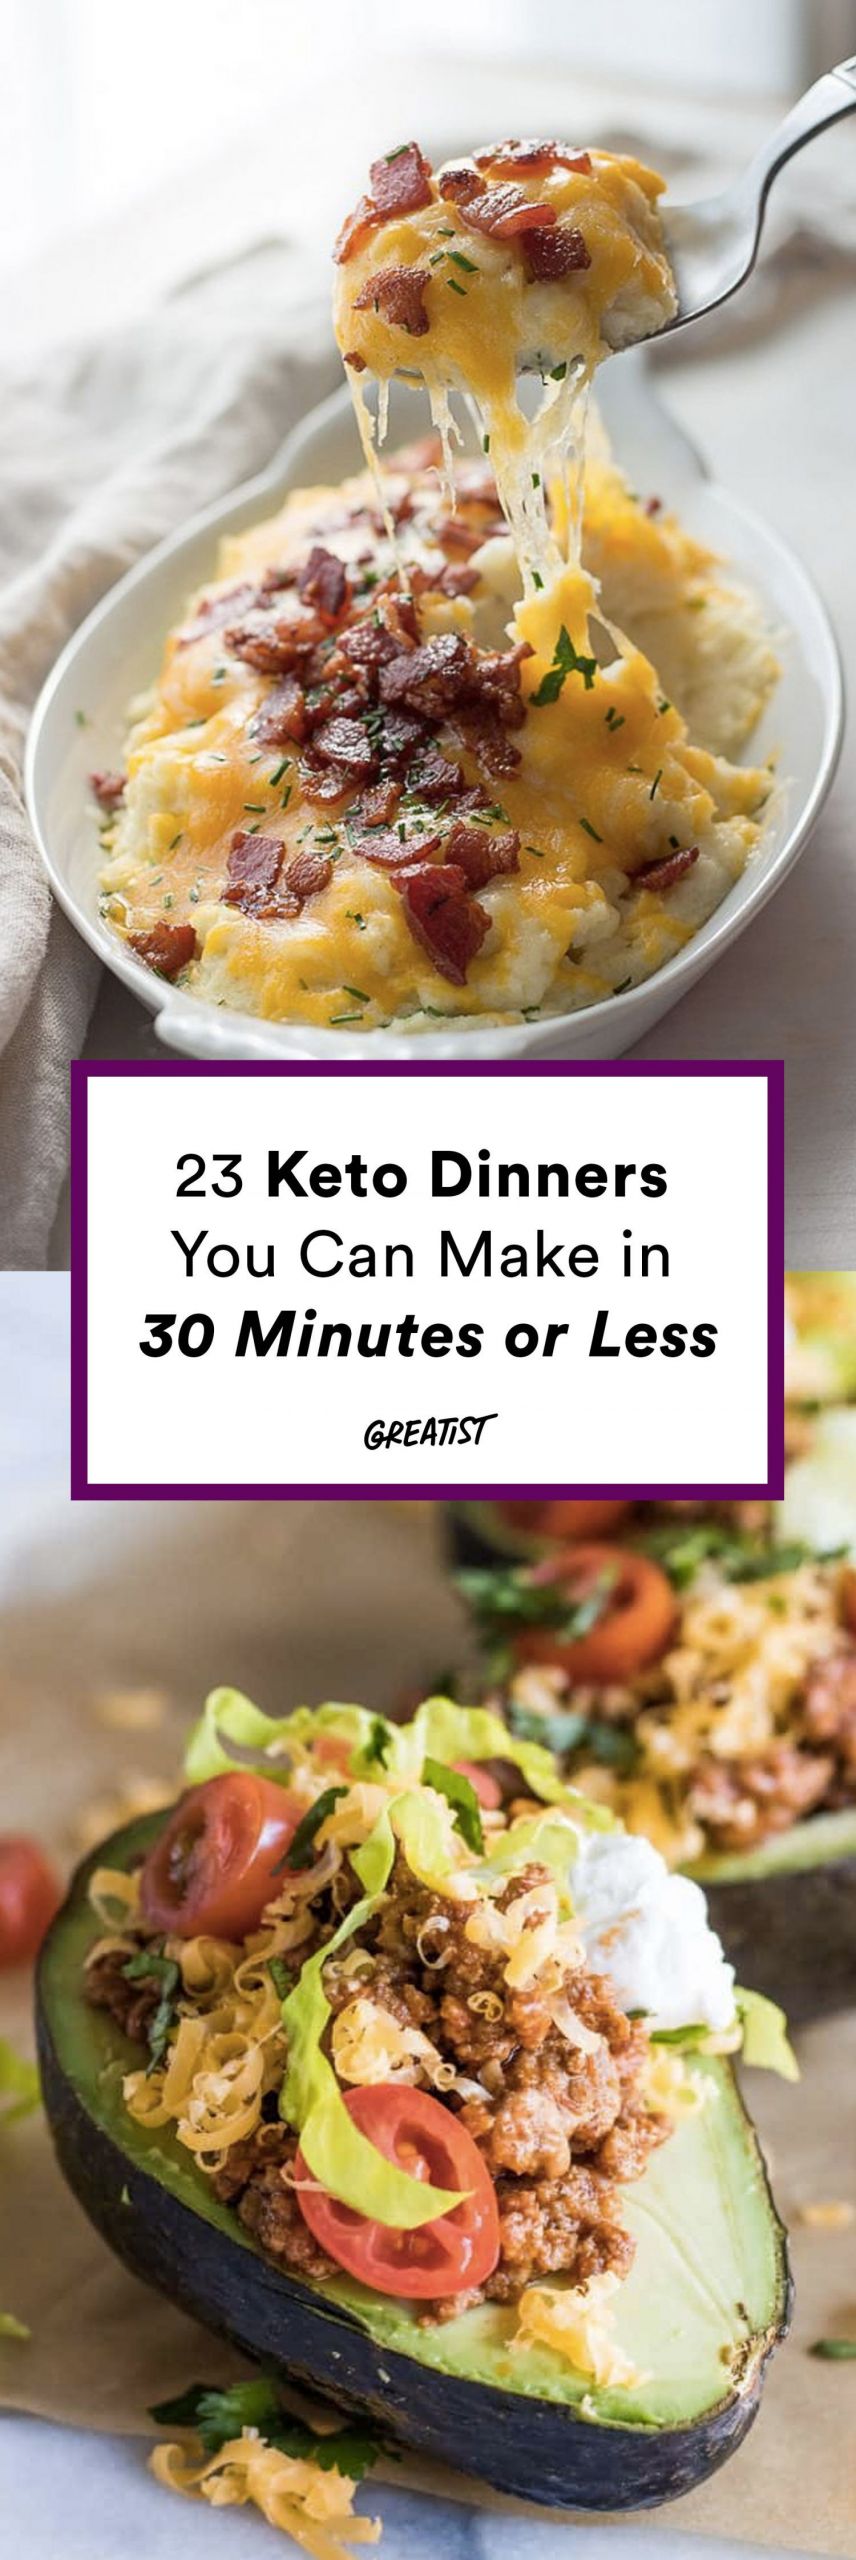 Quick Keto Dinner
 23 Quick Keto Dinners So You Can Make a Low Carb Meal in